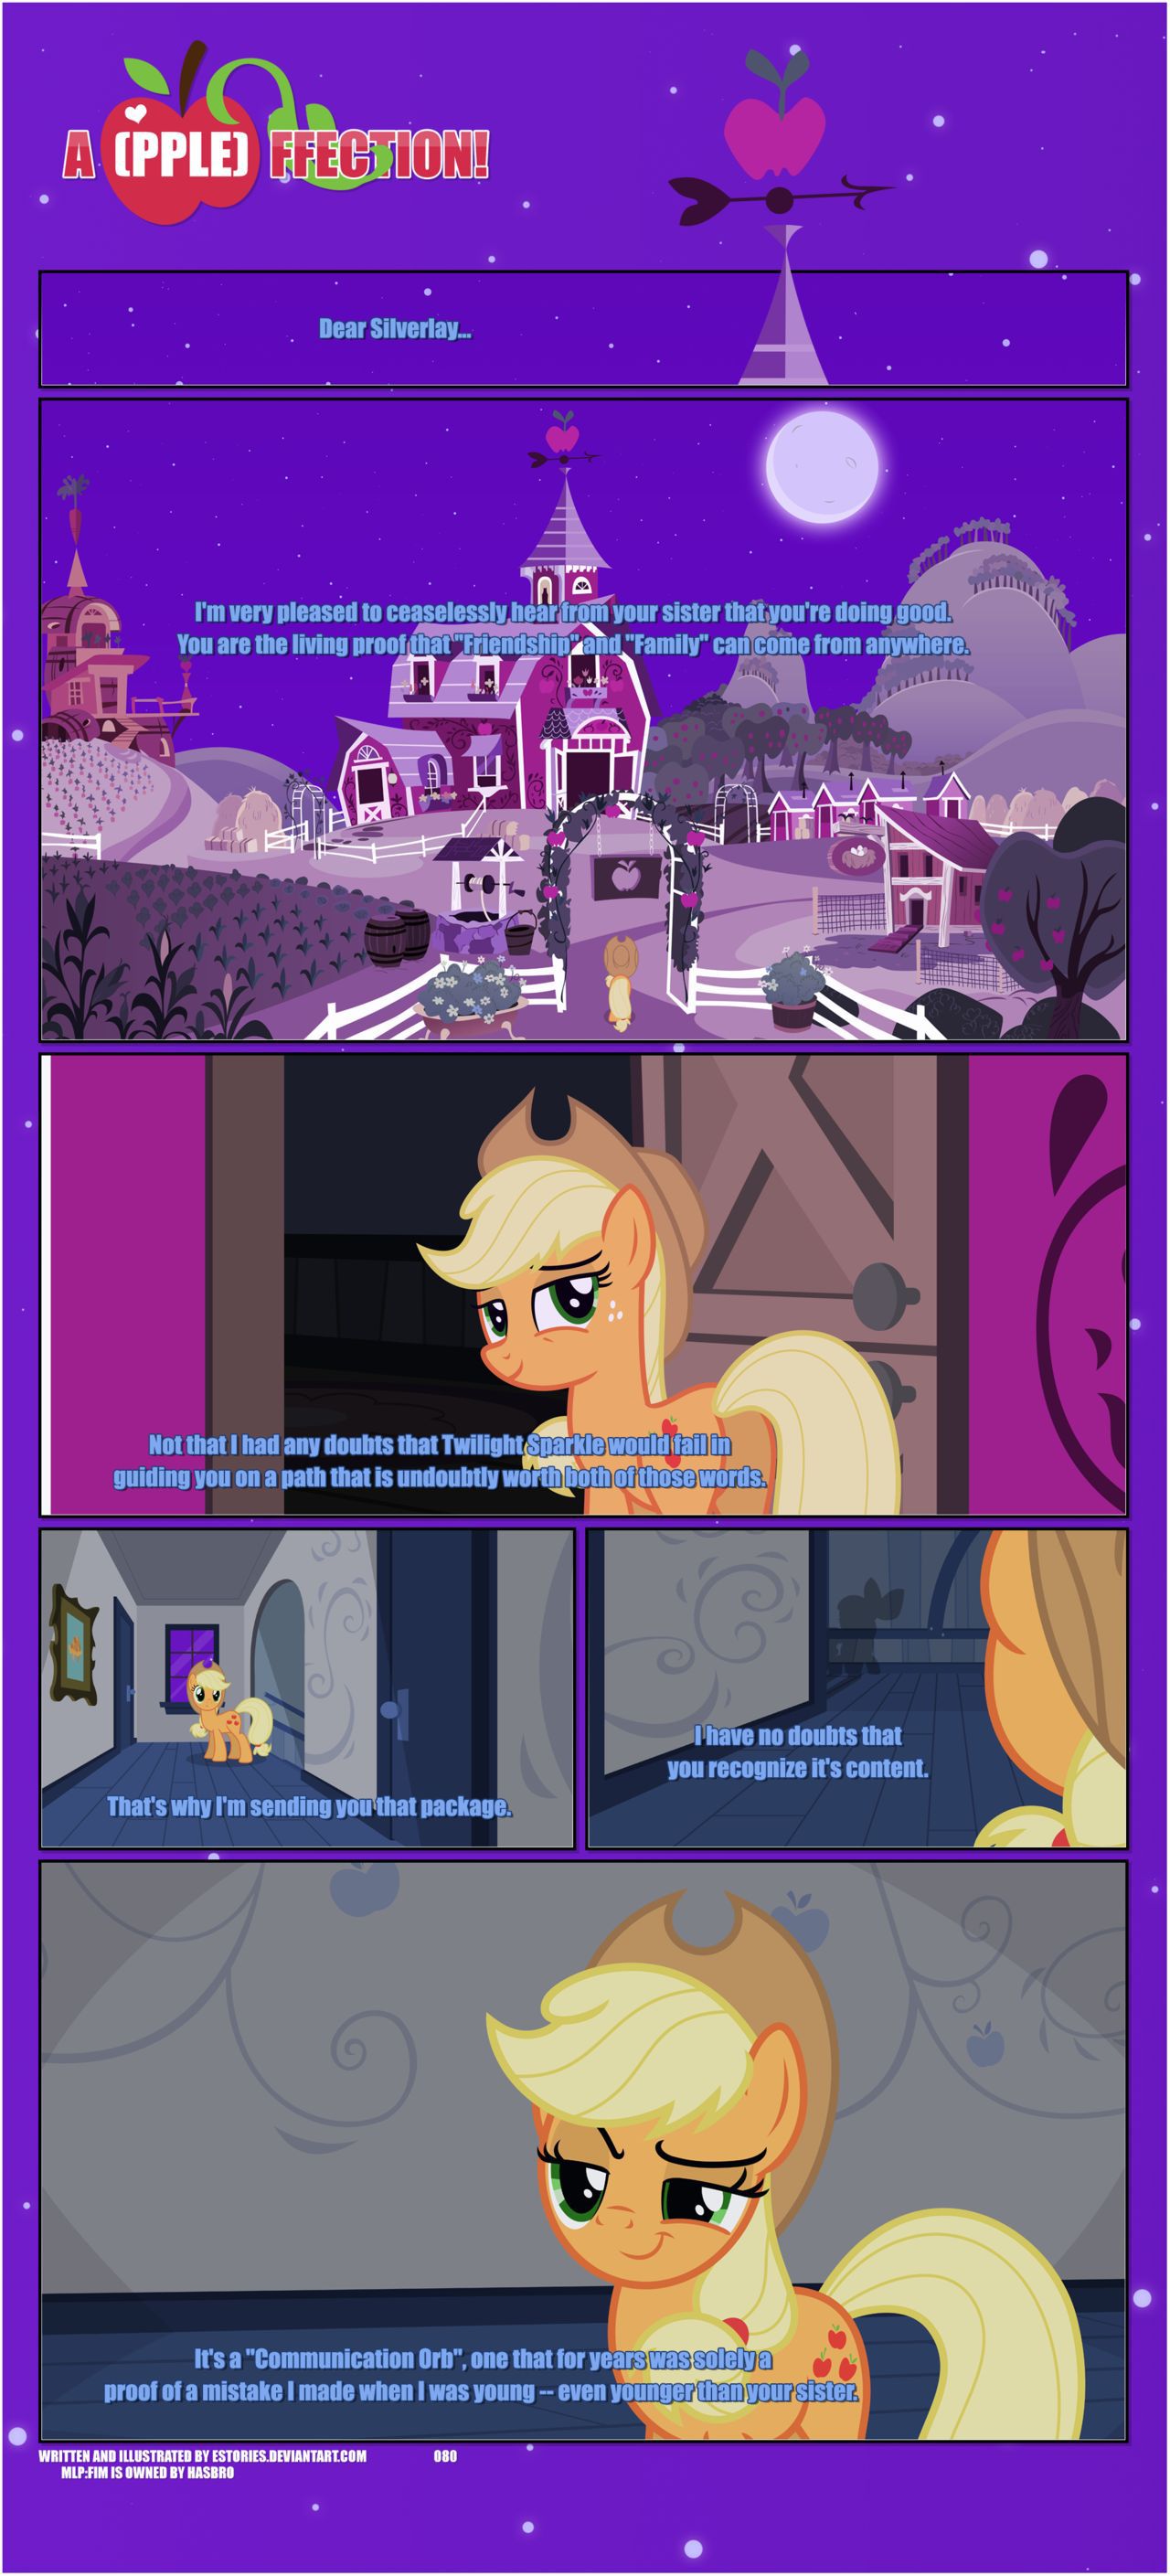 [EStories] Appleffection (My Little Pony Friendship is Magic) [Ongoing] 83